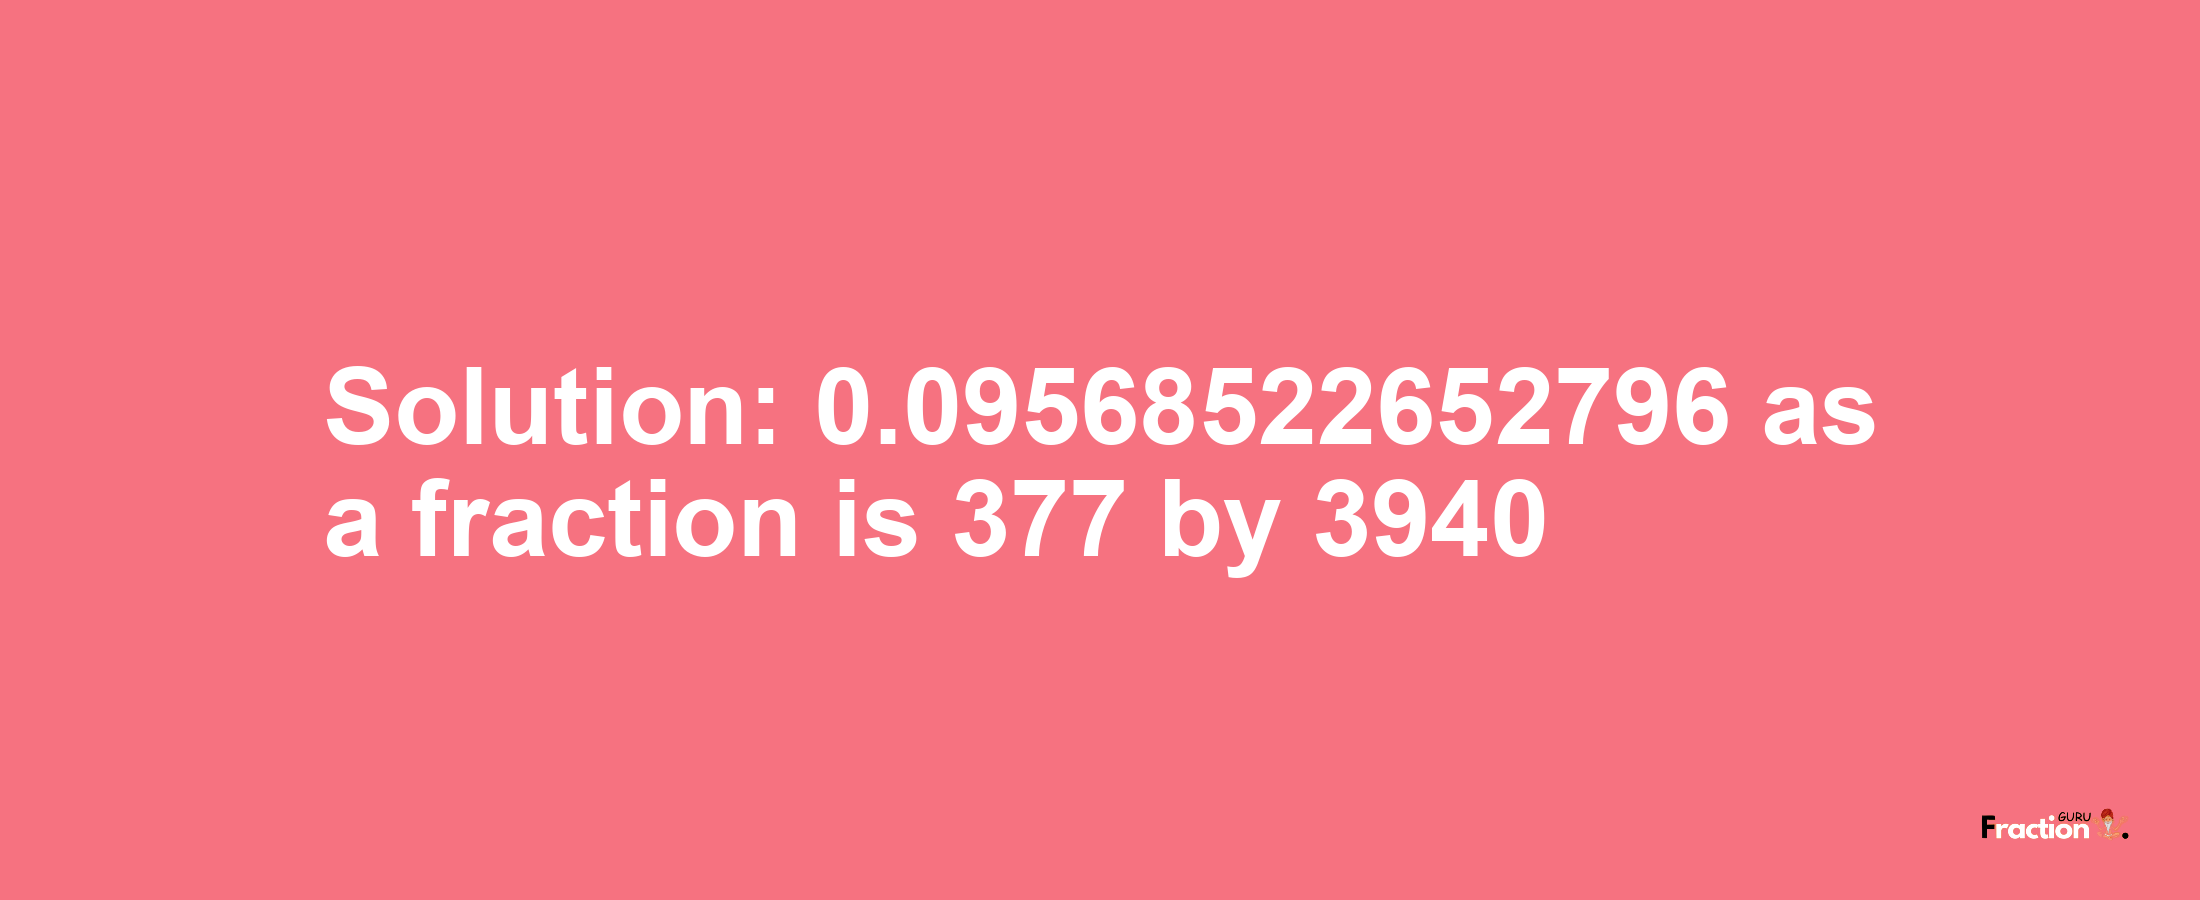 Solution:0.09568522652796 as a fraction is 377/3940